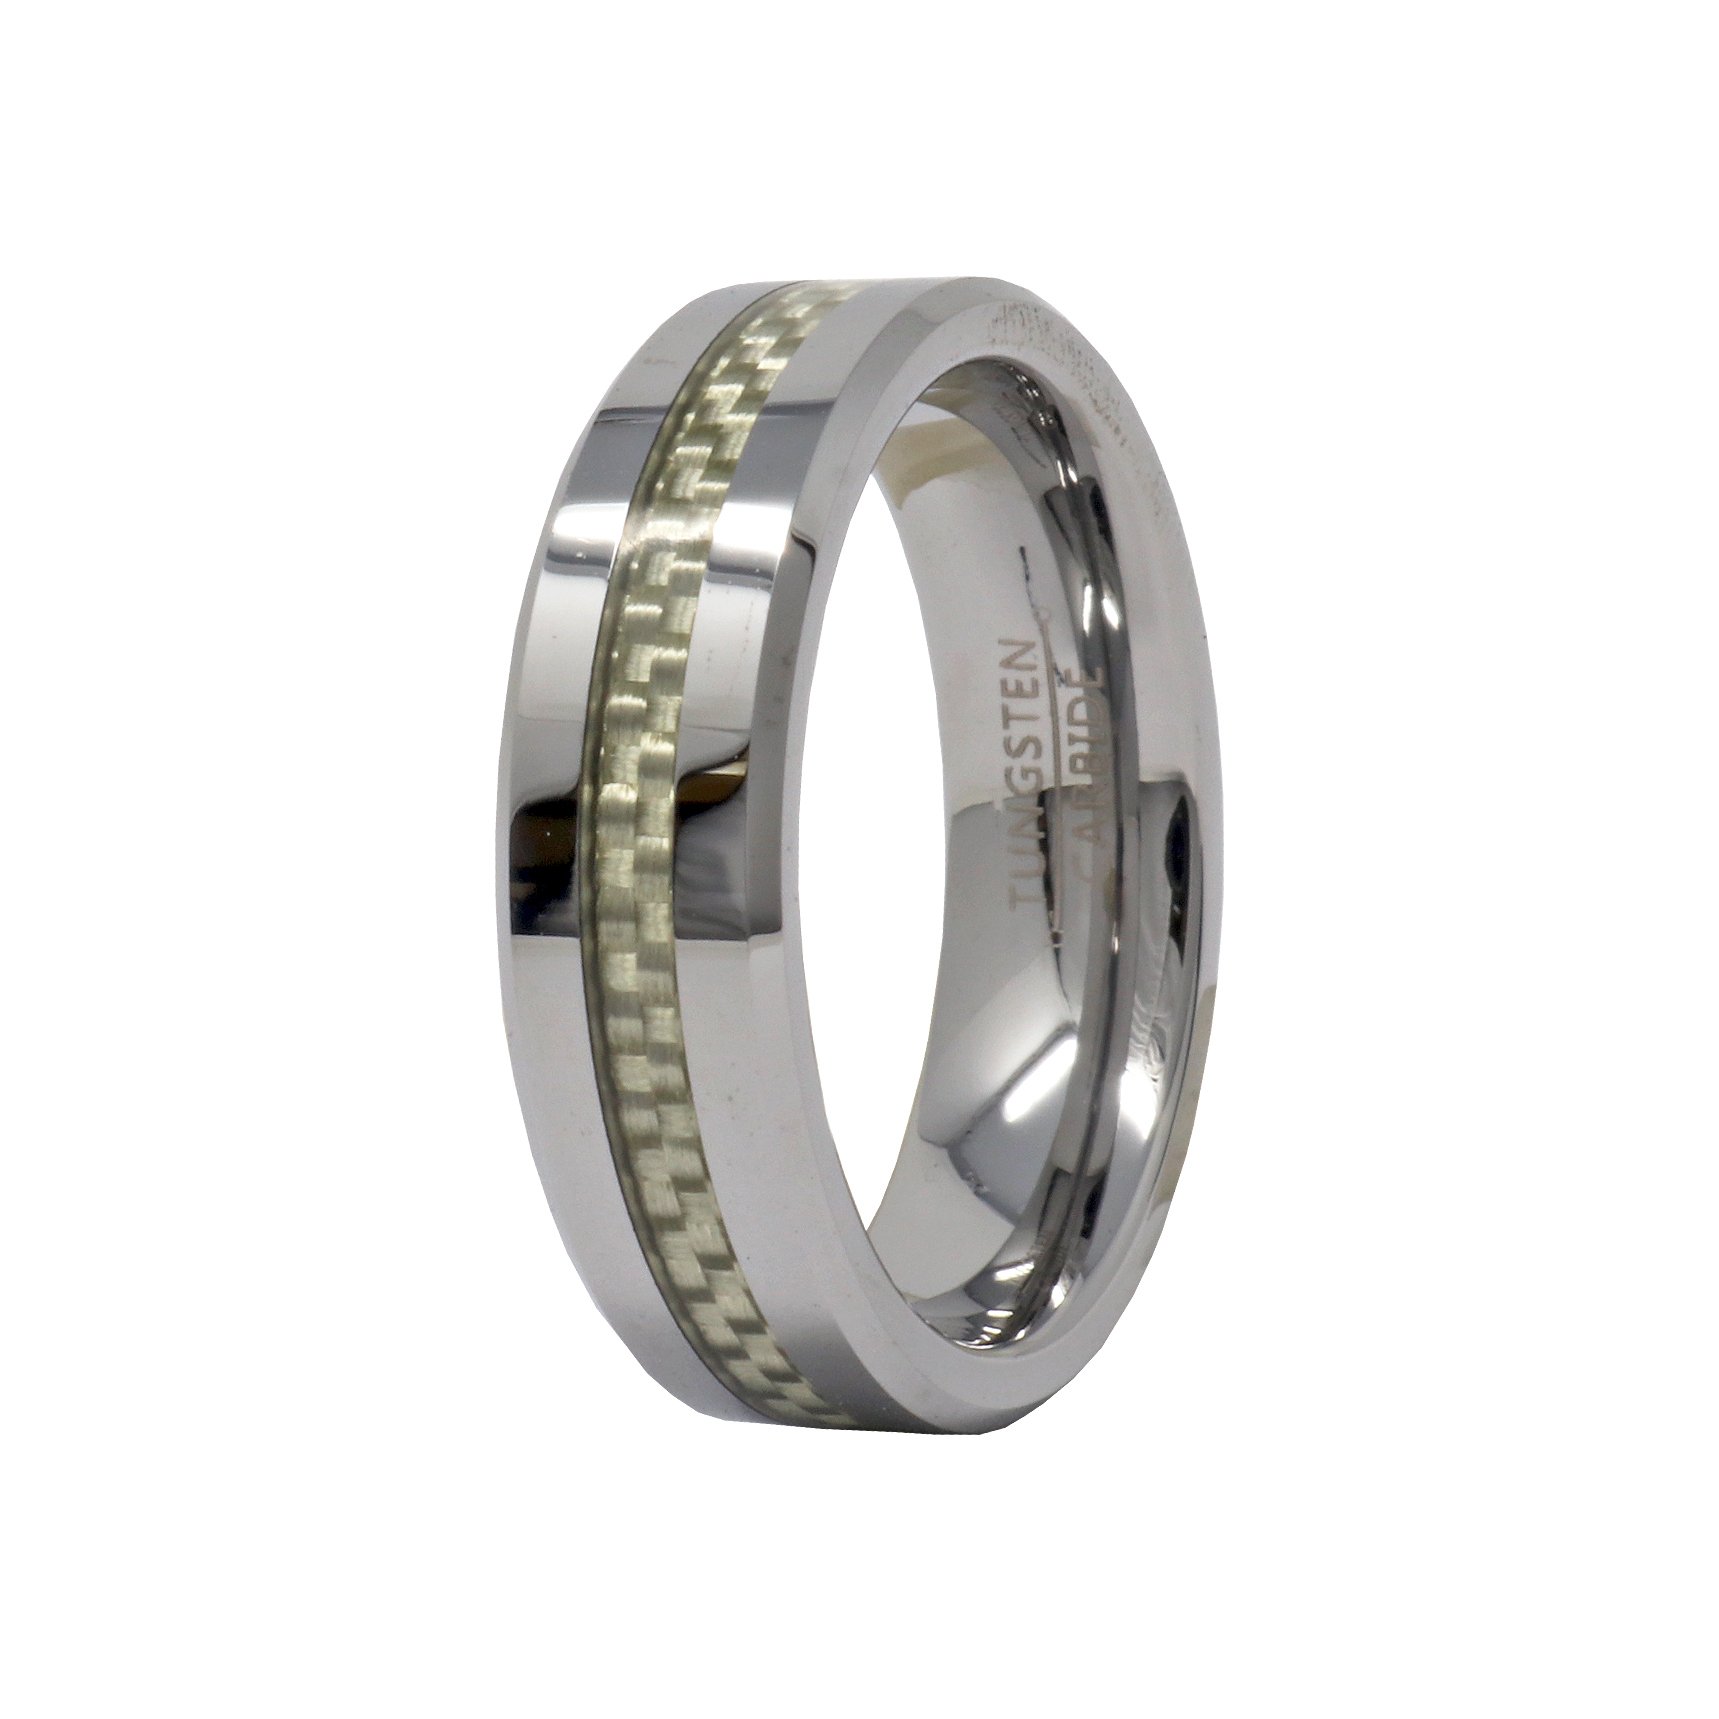 Tungsten Ring Size 7 - 6mm Gray Carbon Fiber Inlay